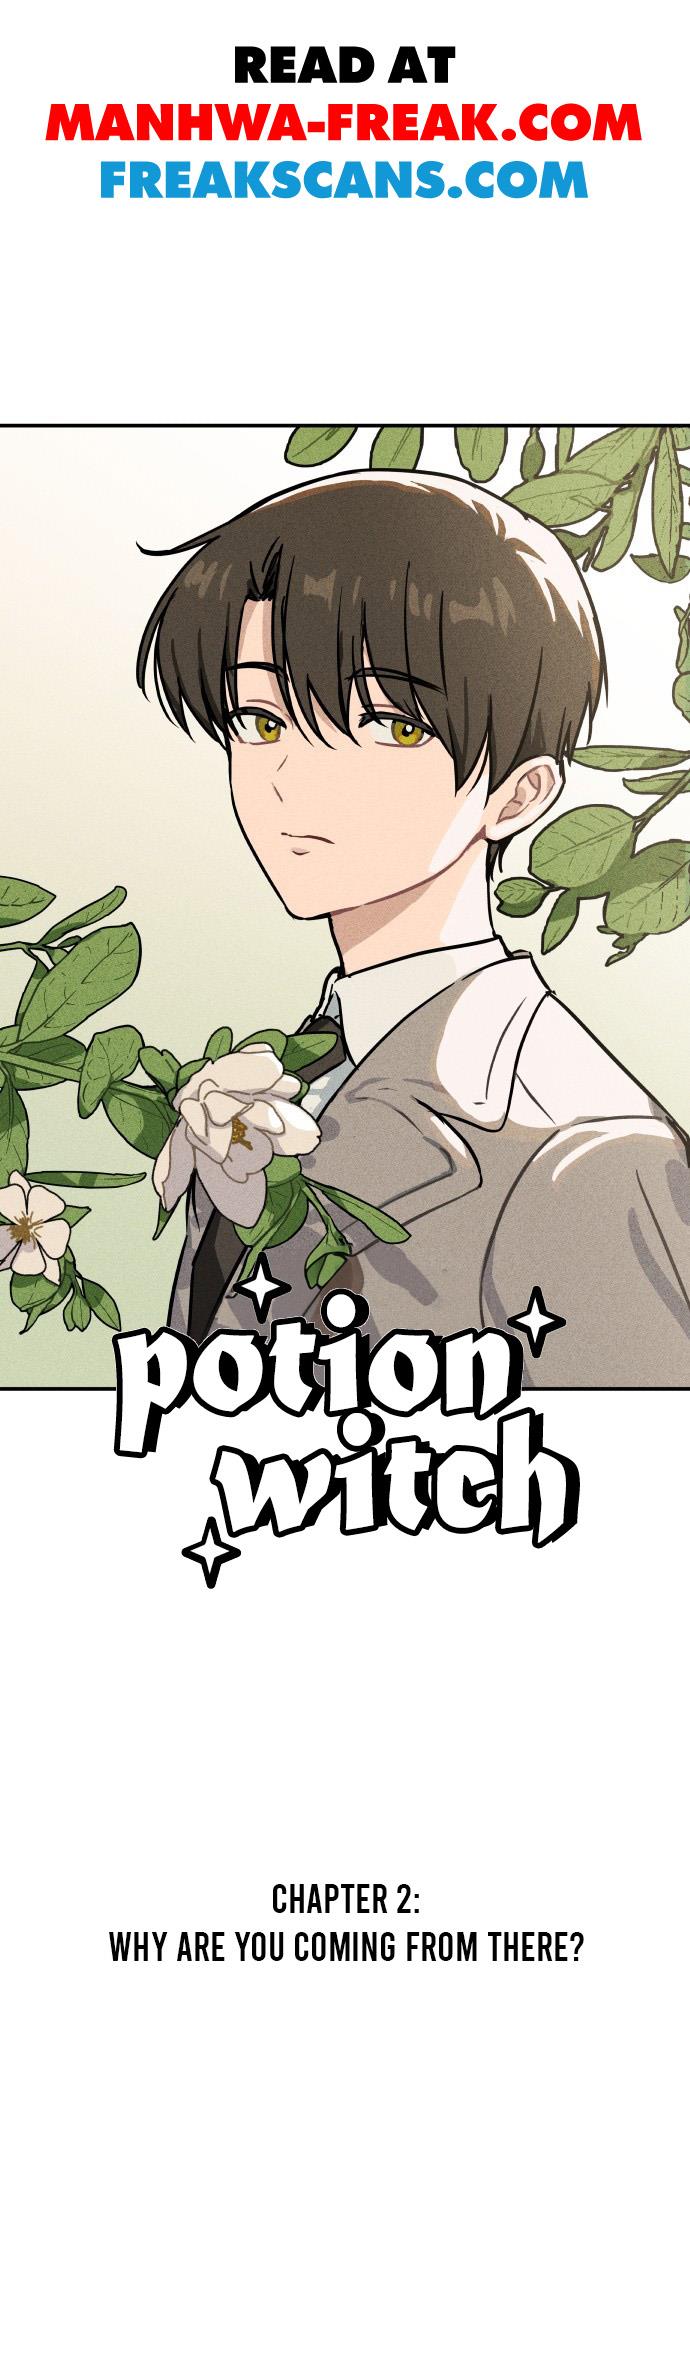 Potion Witch - Page 2